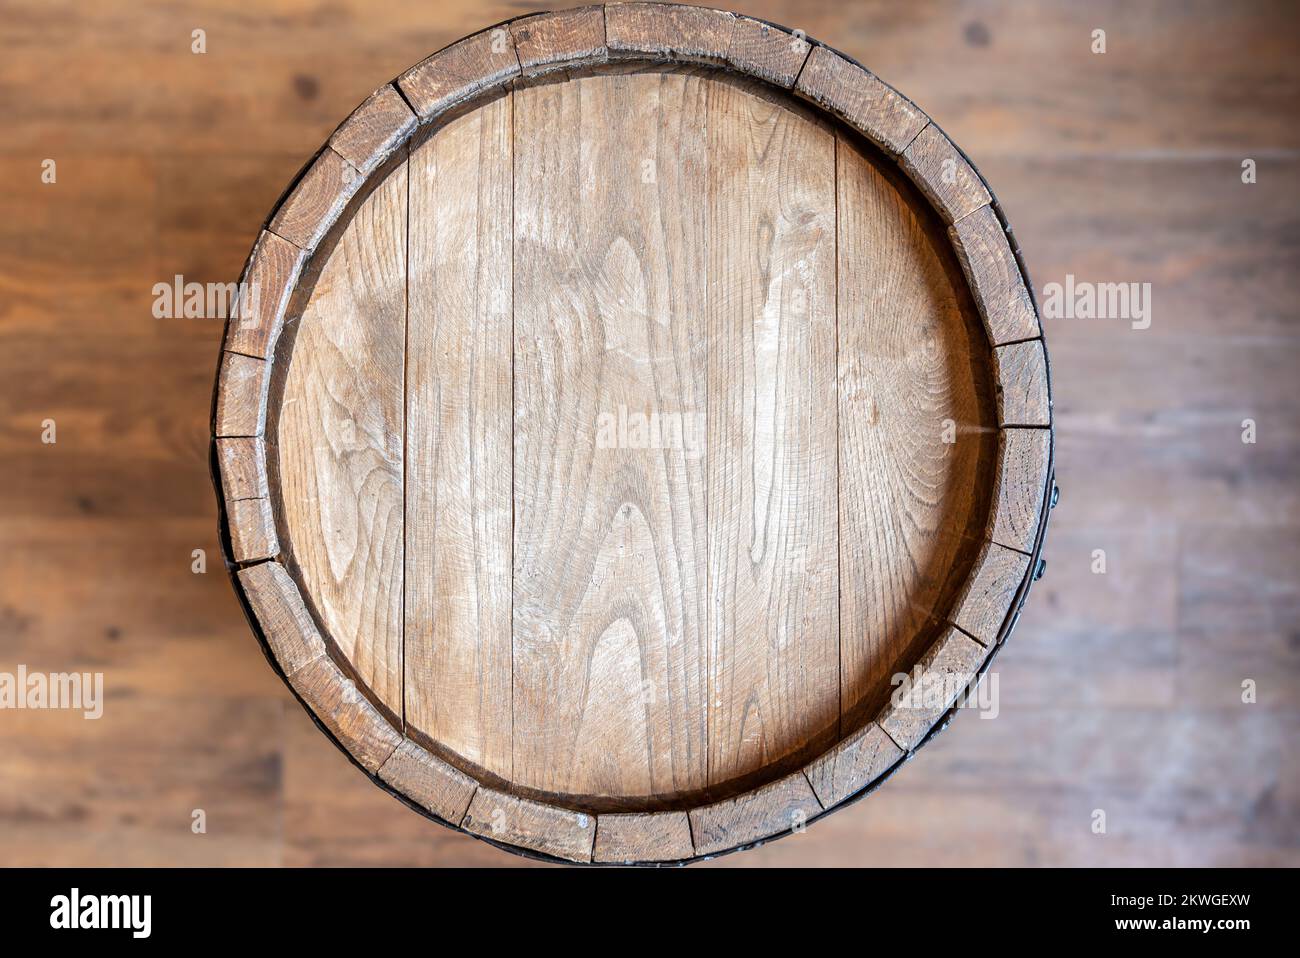 Old wine barrel as background or texture with room for customization Stock Photo